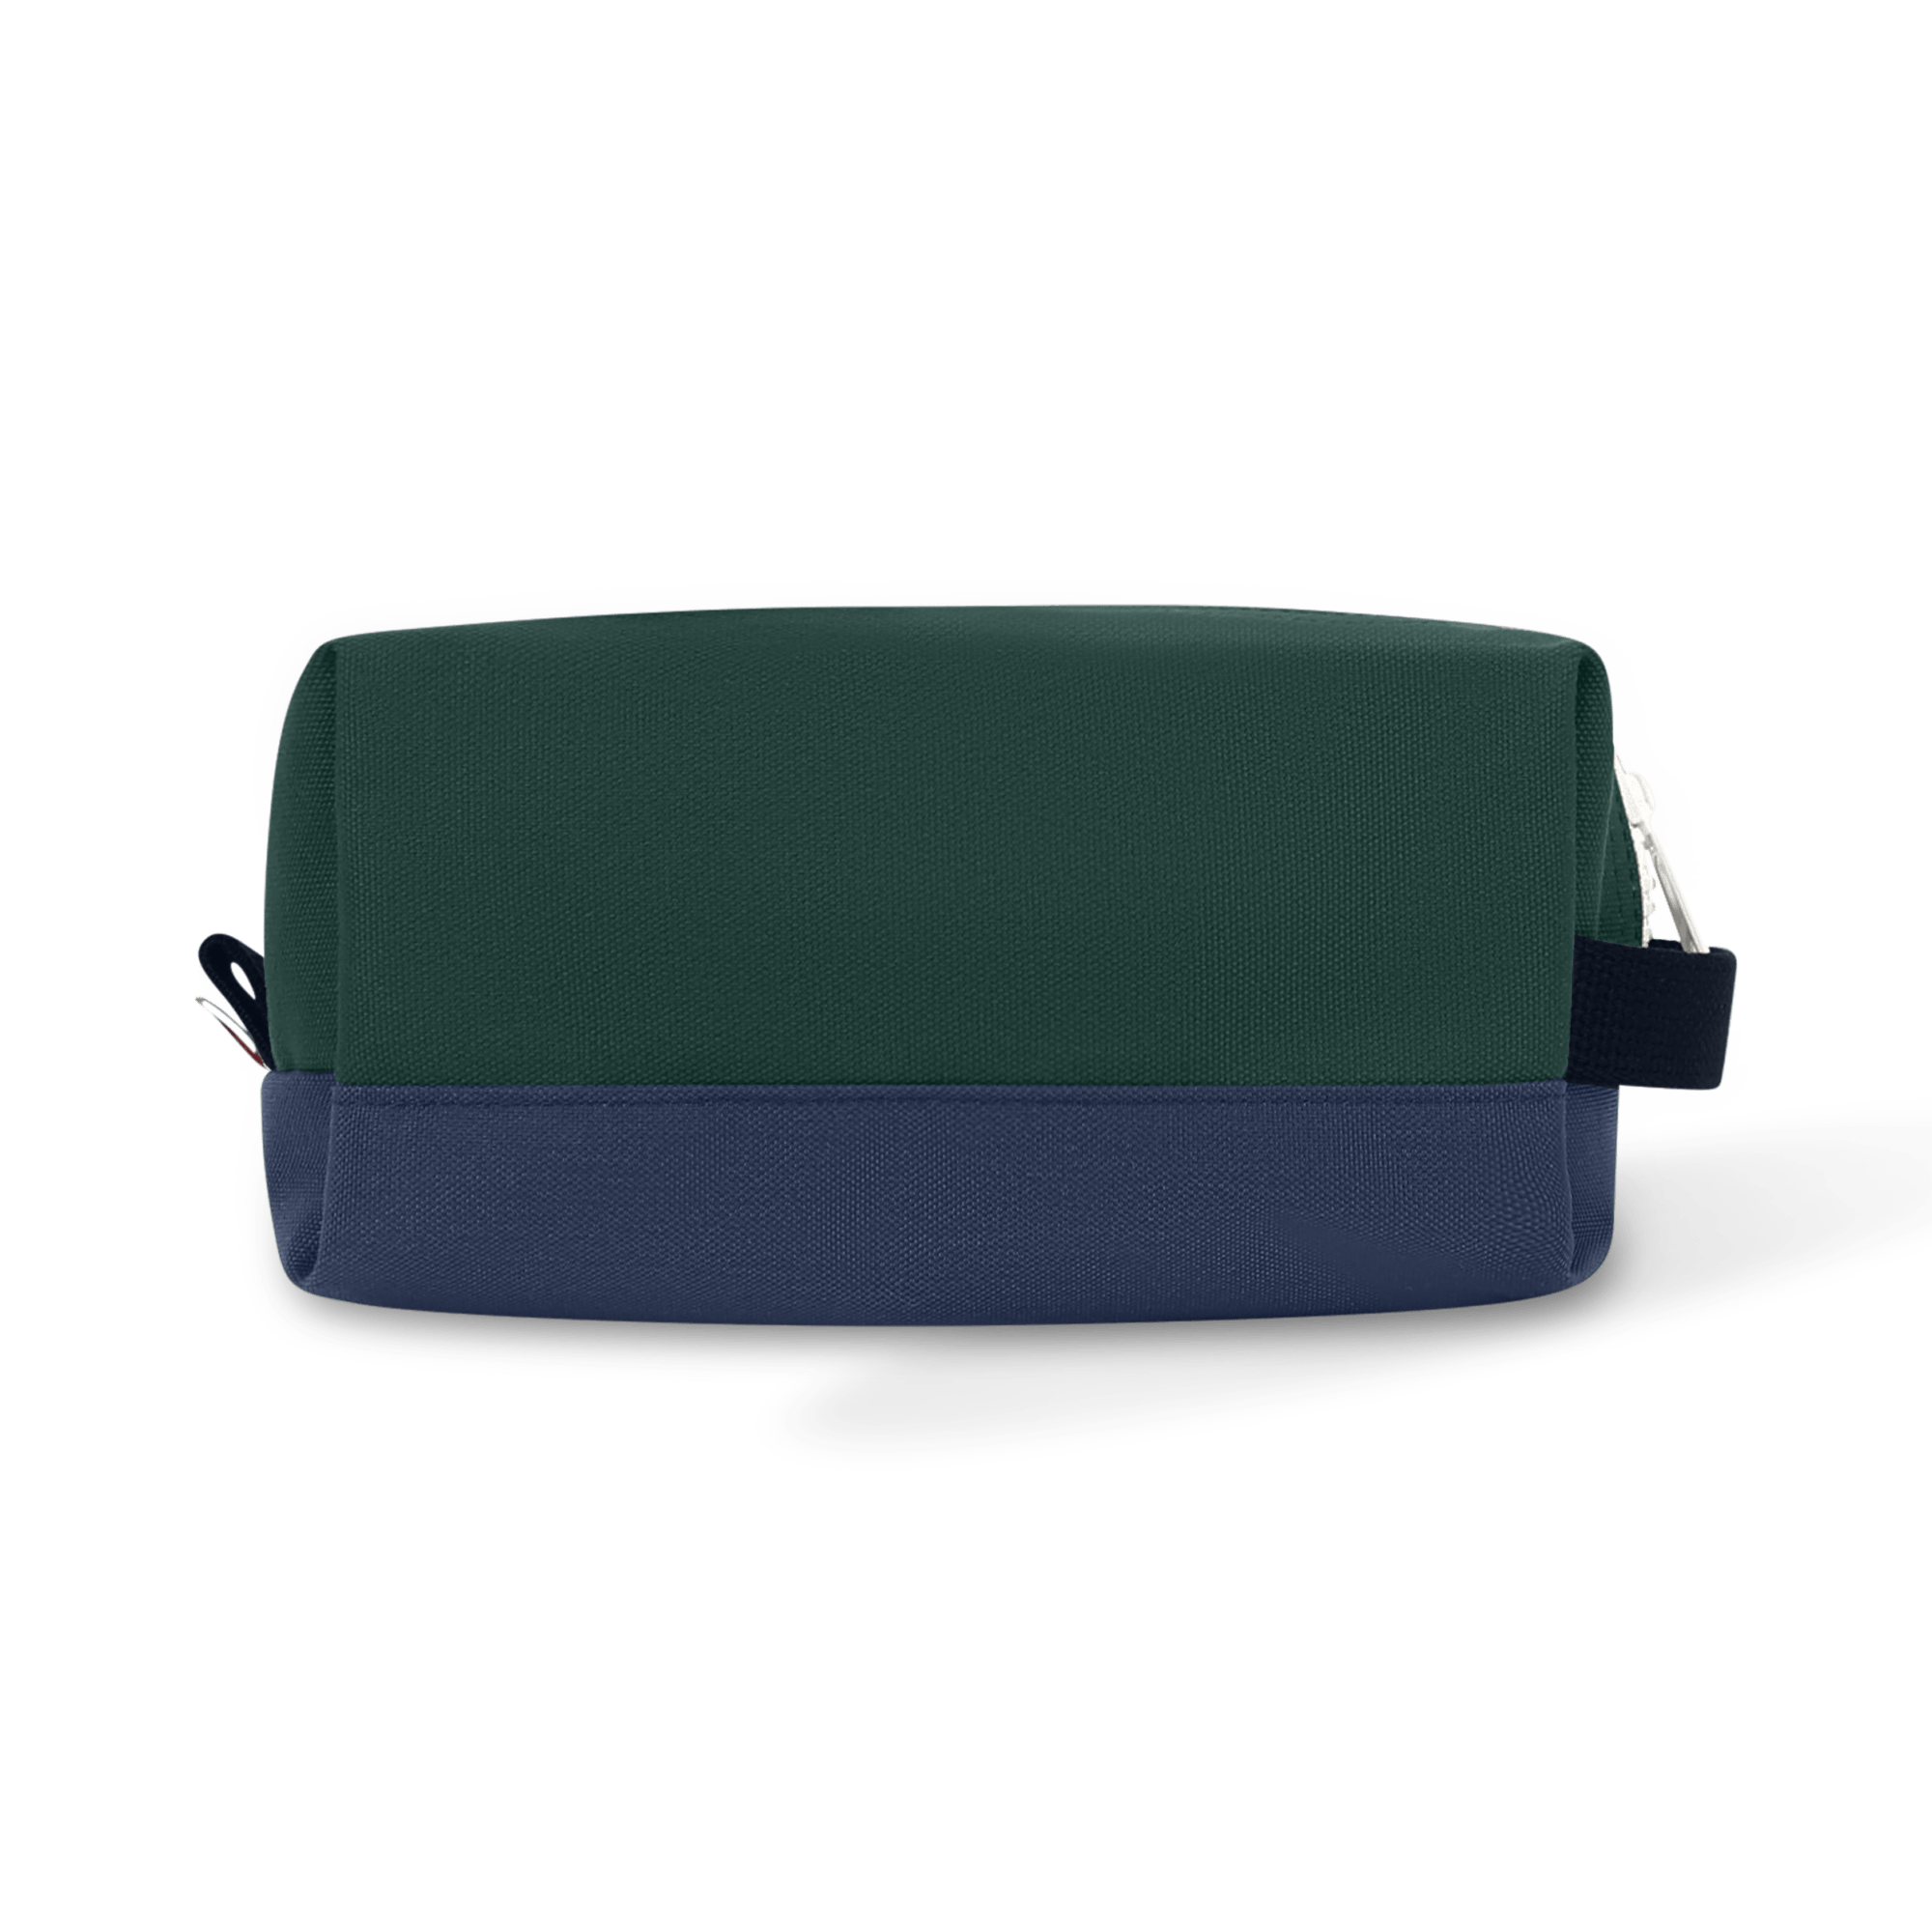 Lacoste - Monogram Embossed Leather Pouch Purse - Dark Green